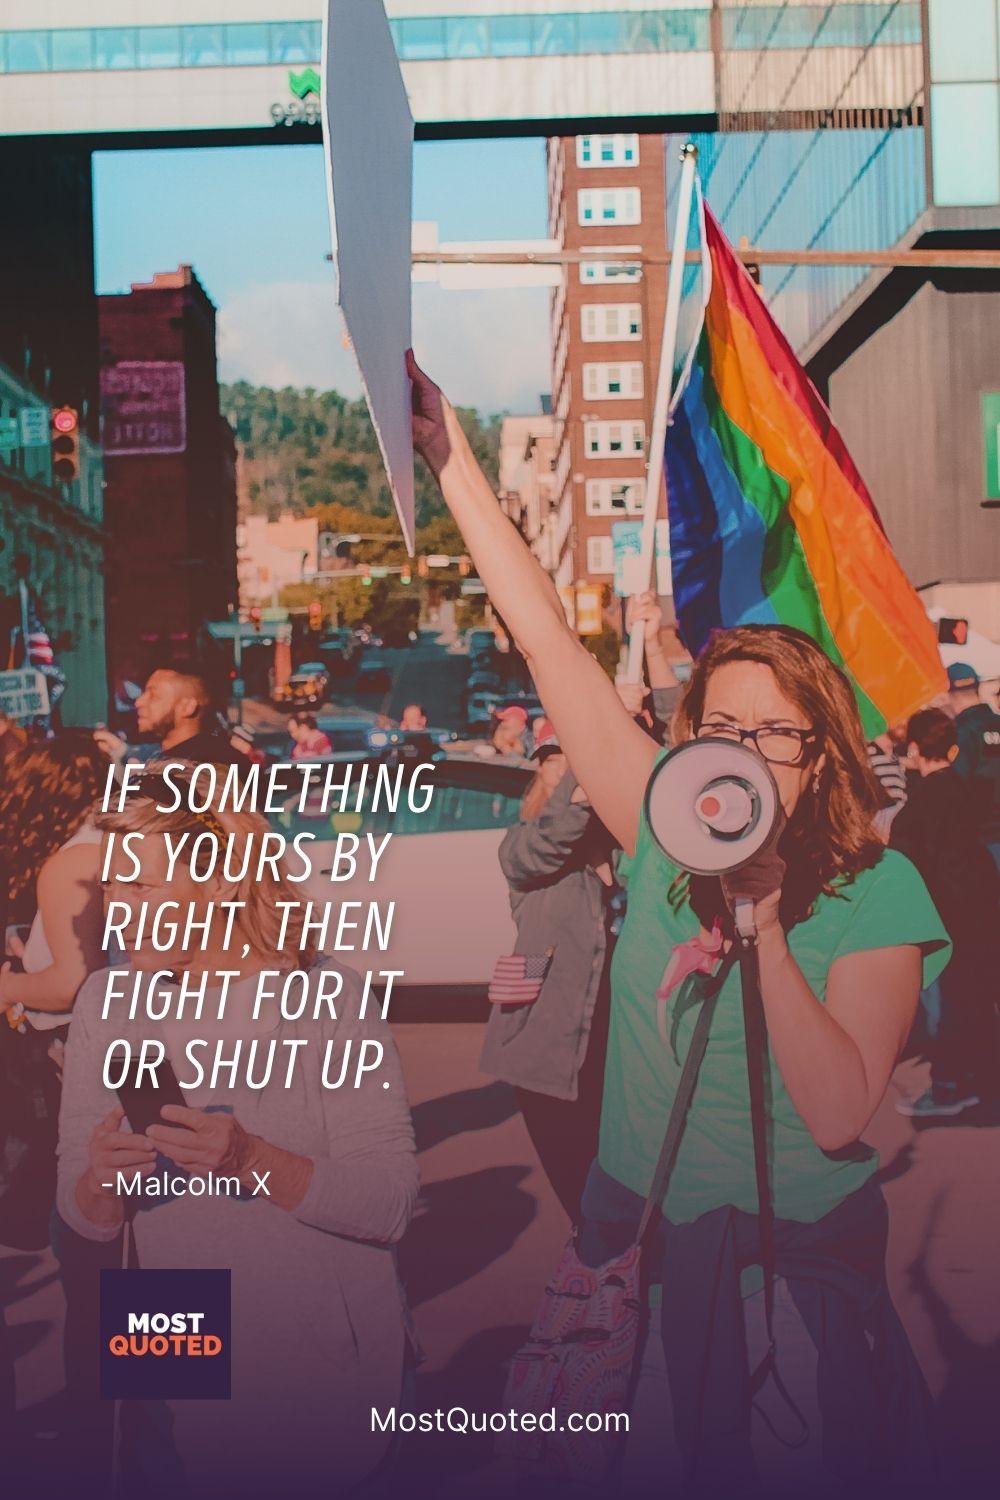 If something is yours by right, then fight for it or shut up. - Malcolm X